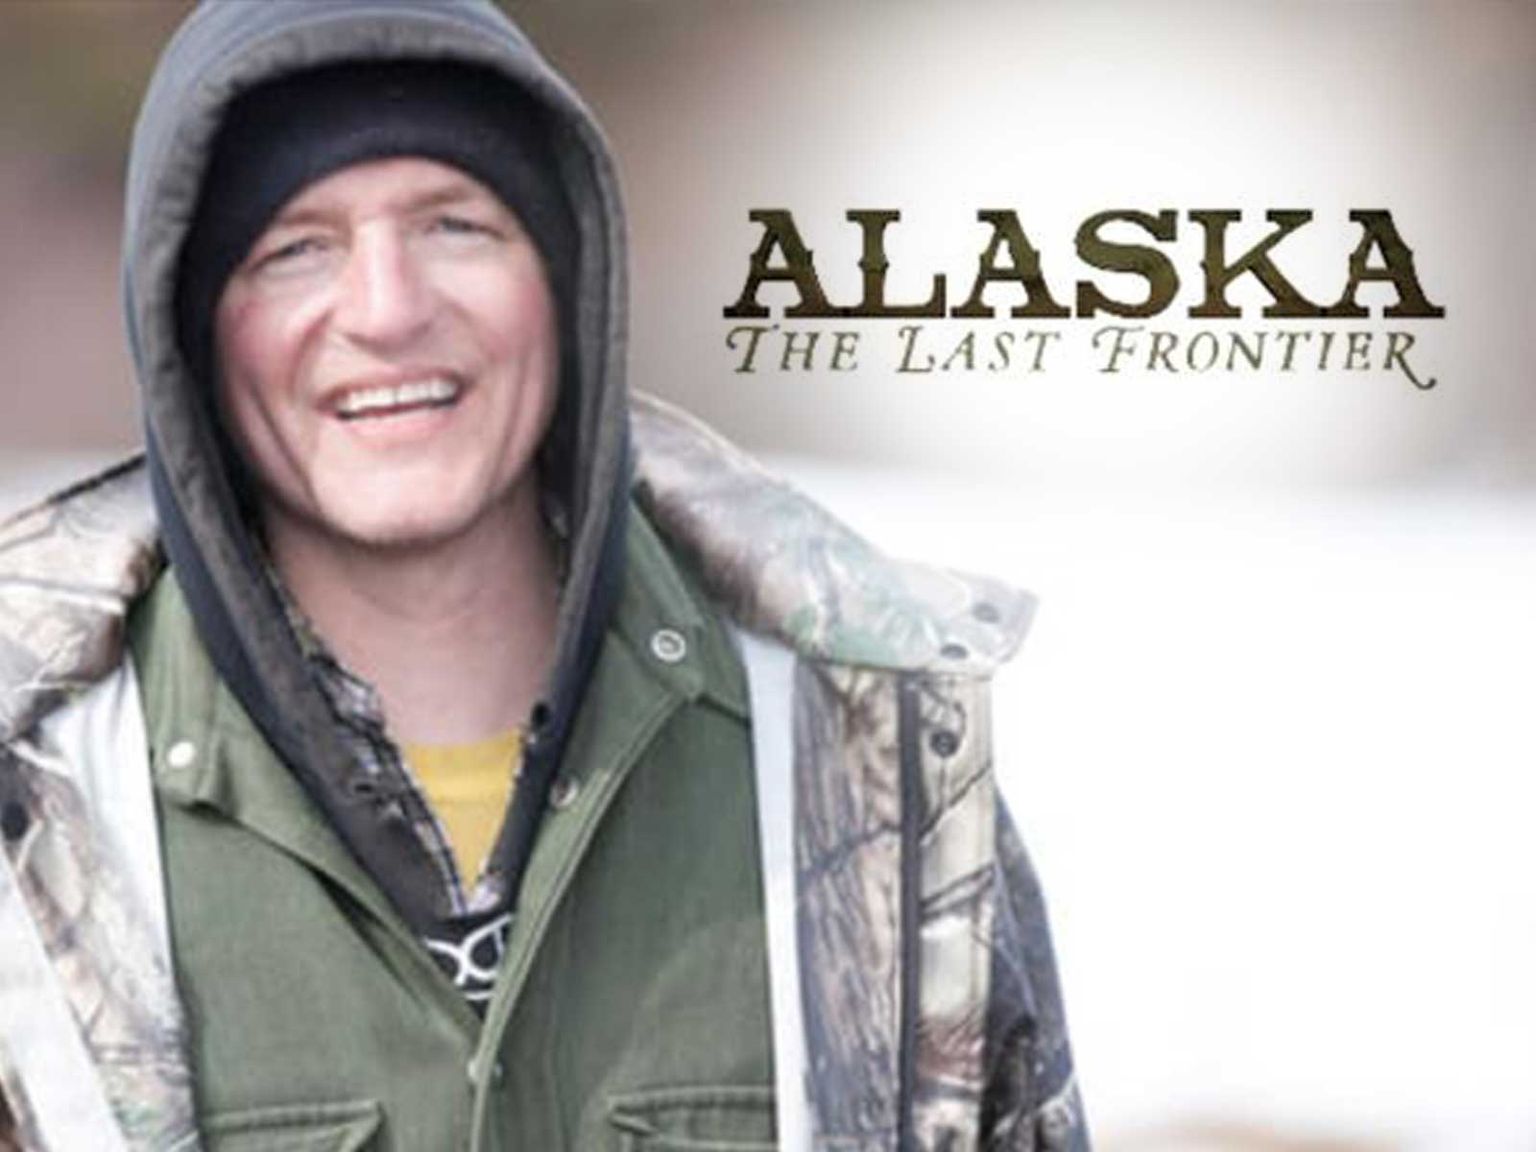 'Alaska The Last Frontier' Star on the Hunt for 100K After Falling